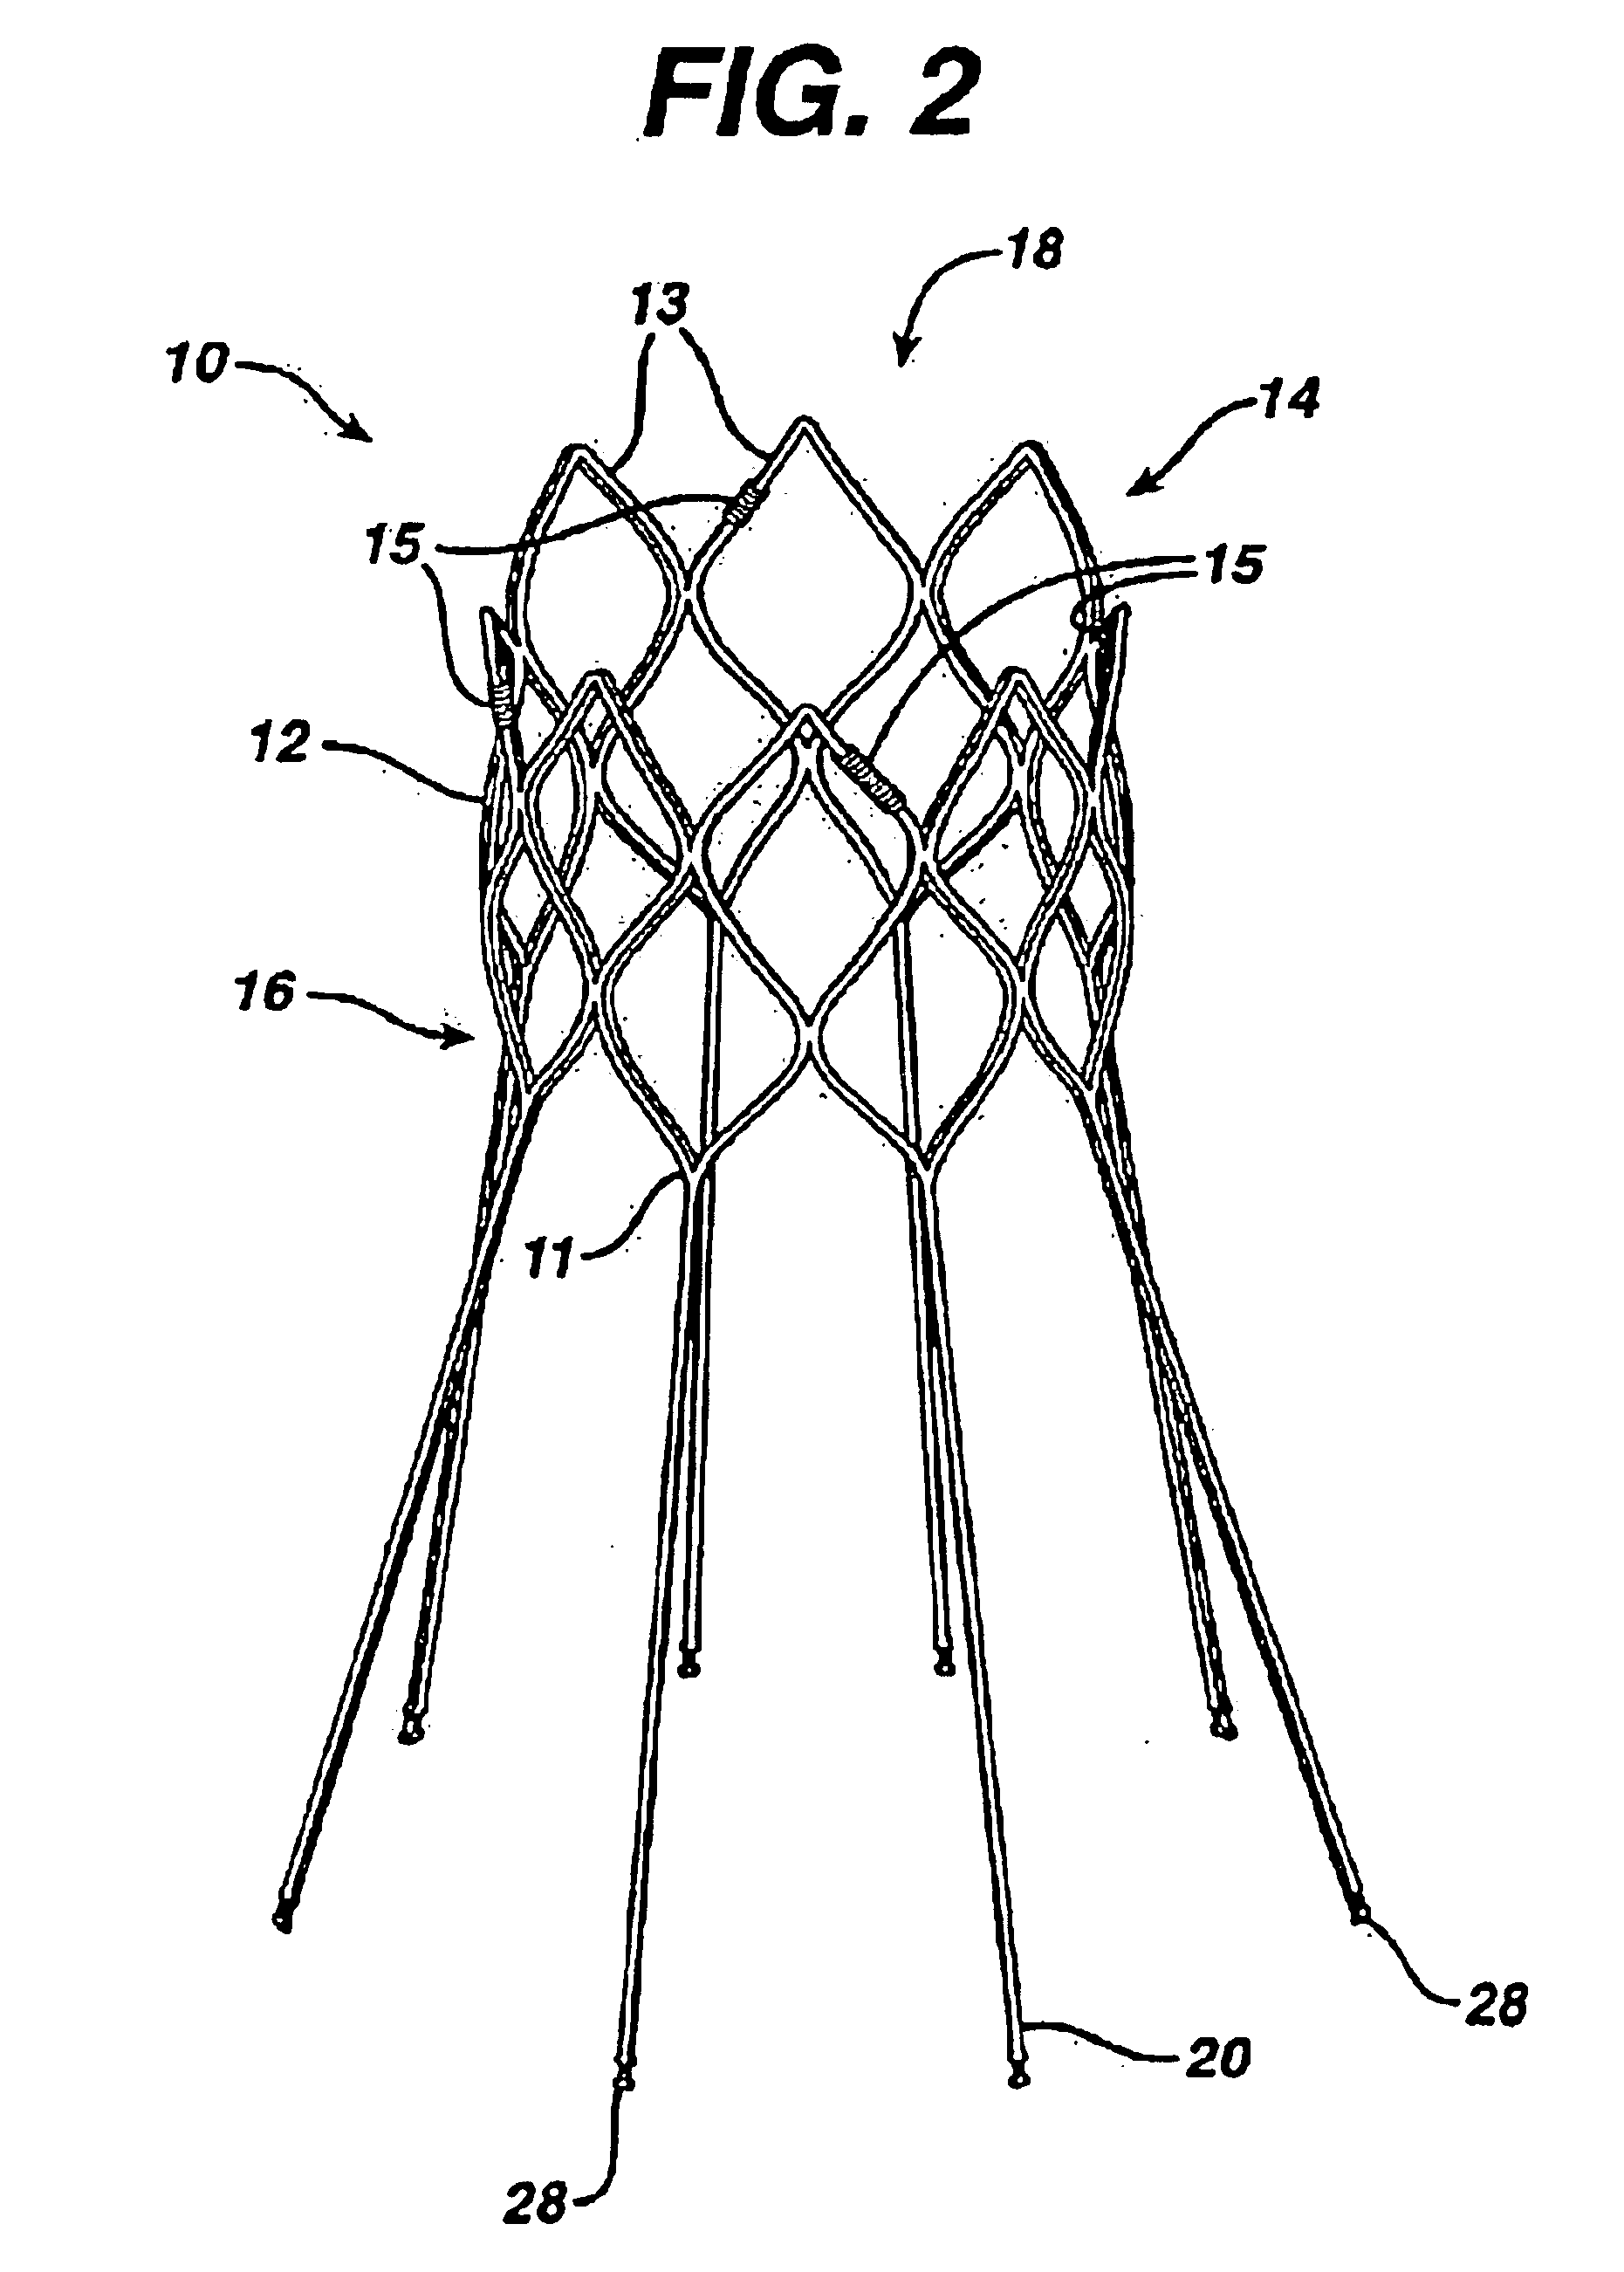 Extension prosthesis for an arterial repair